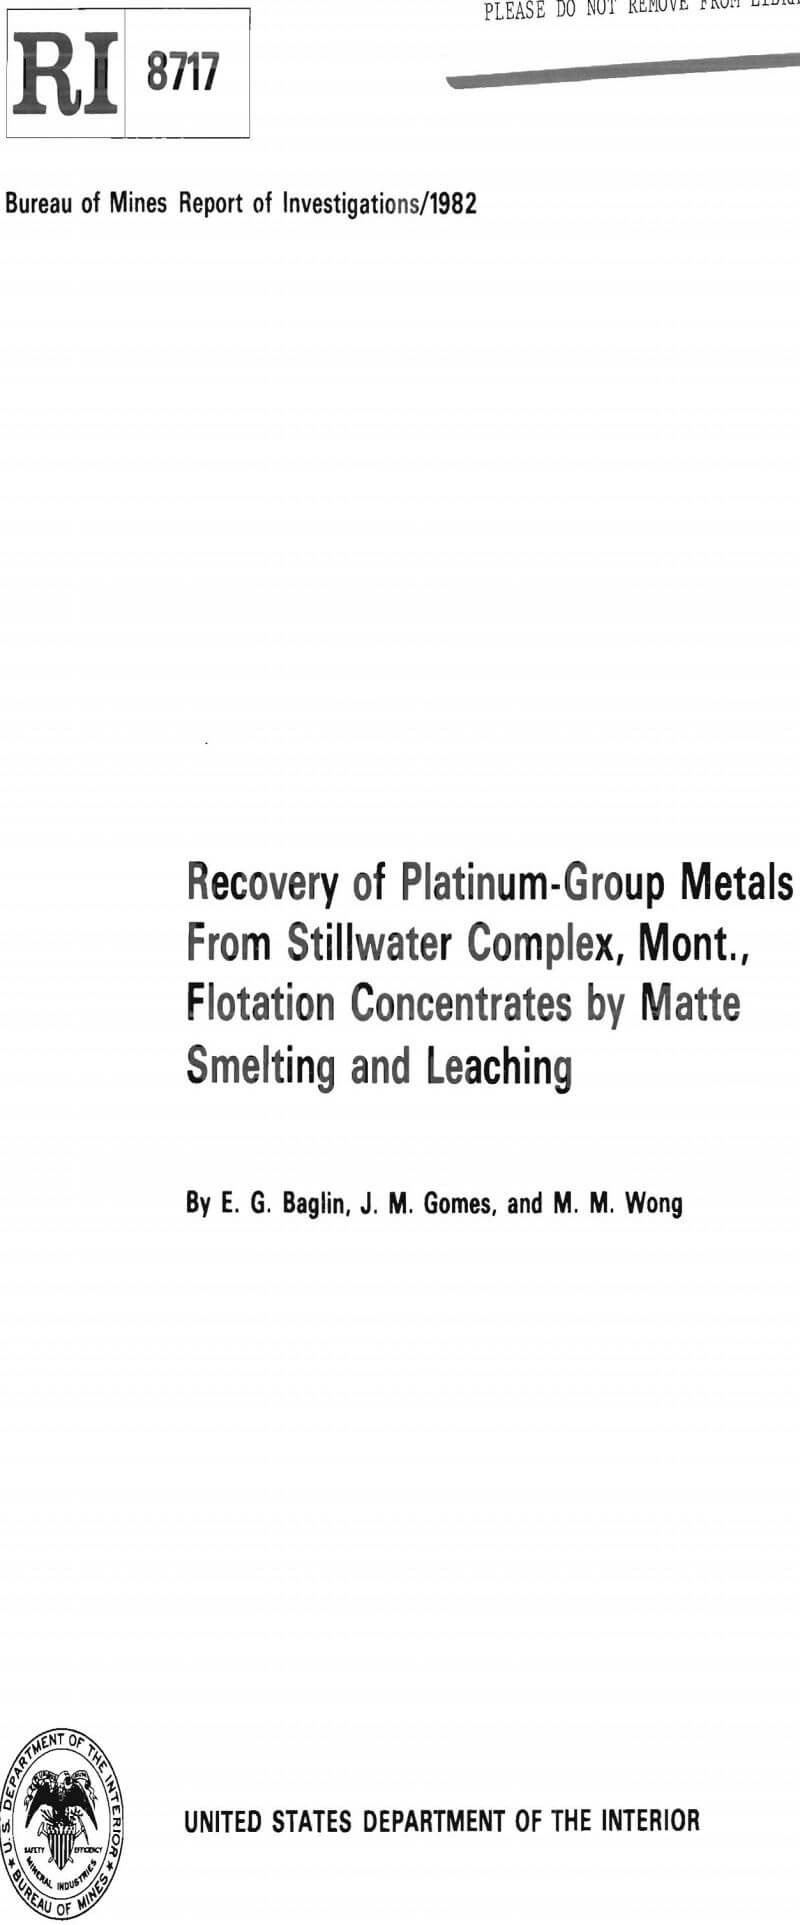 recovery of platinum-group metals from stillwater complex mont flotation concentrates by matte smelting and leaching